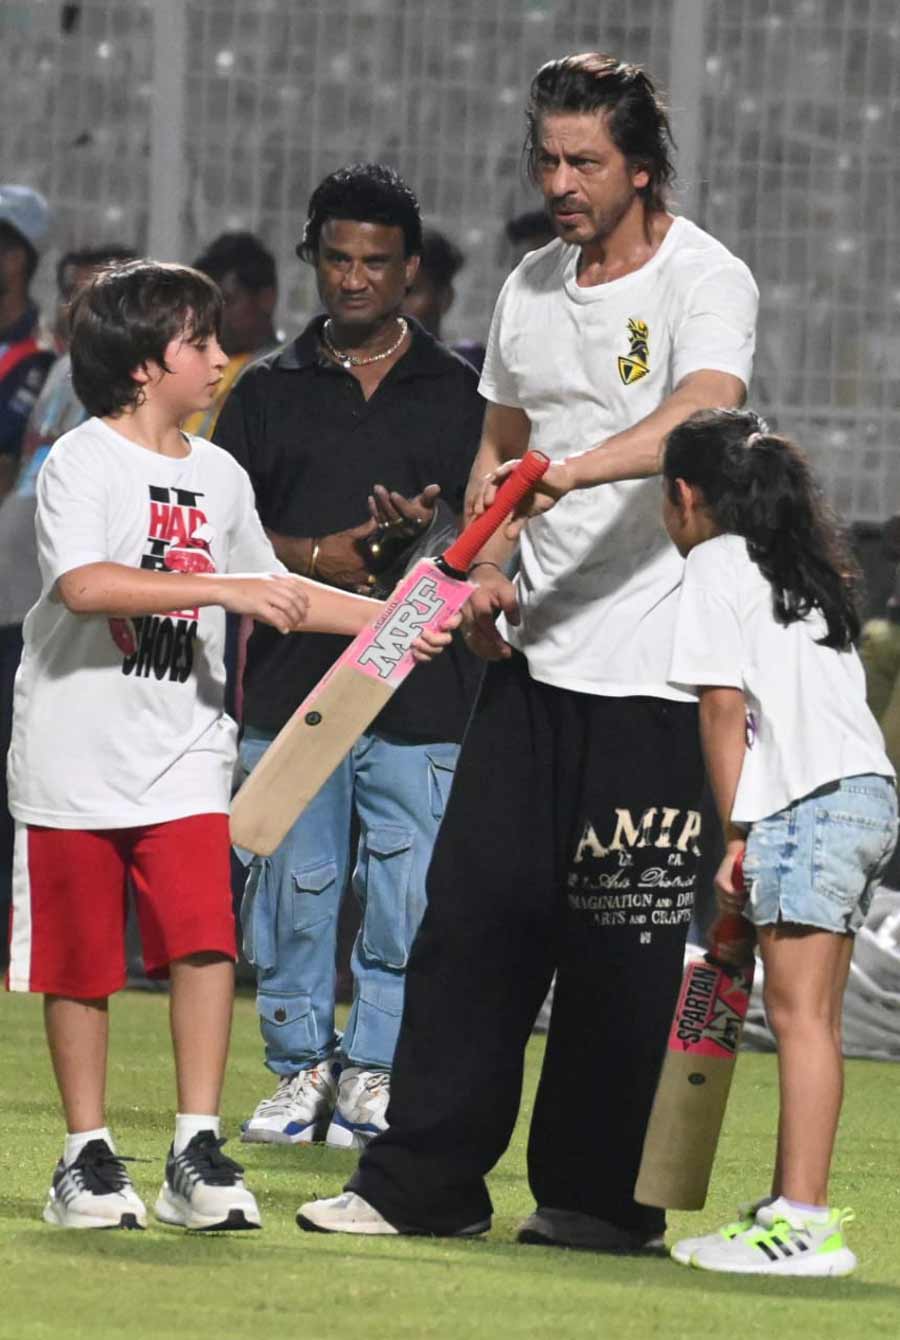 SRK spent at playful evening with the kids on Sunday in Kolkata, giving them a tip or two 